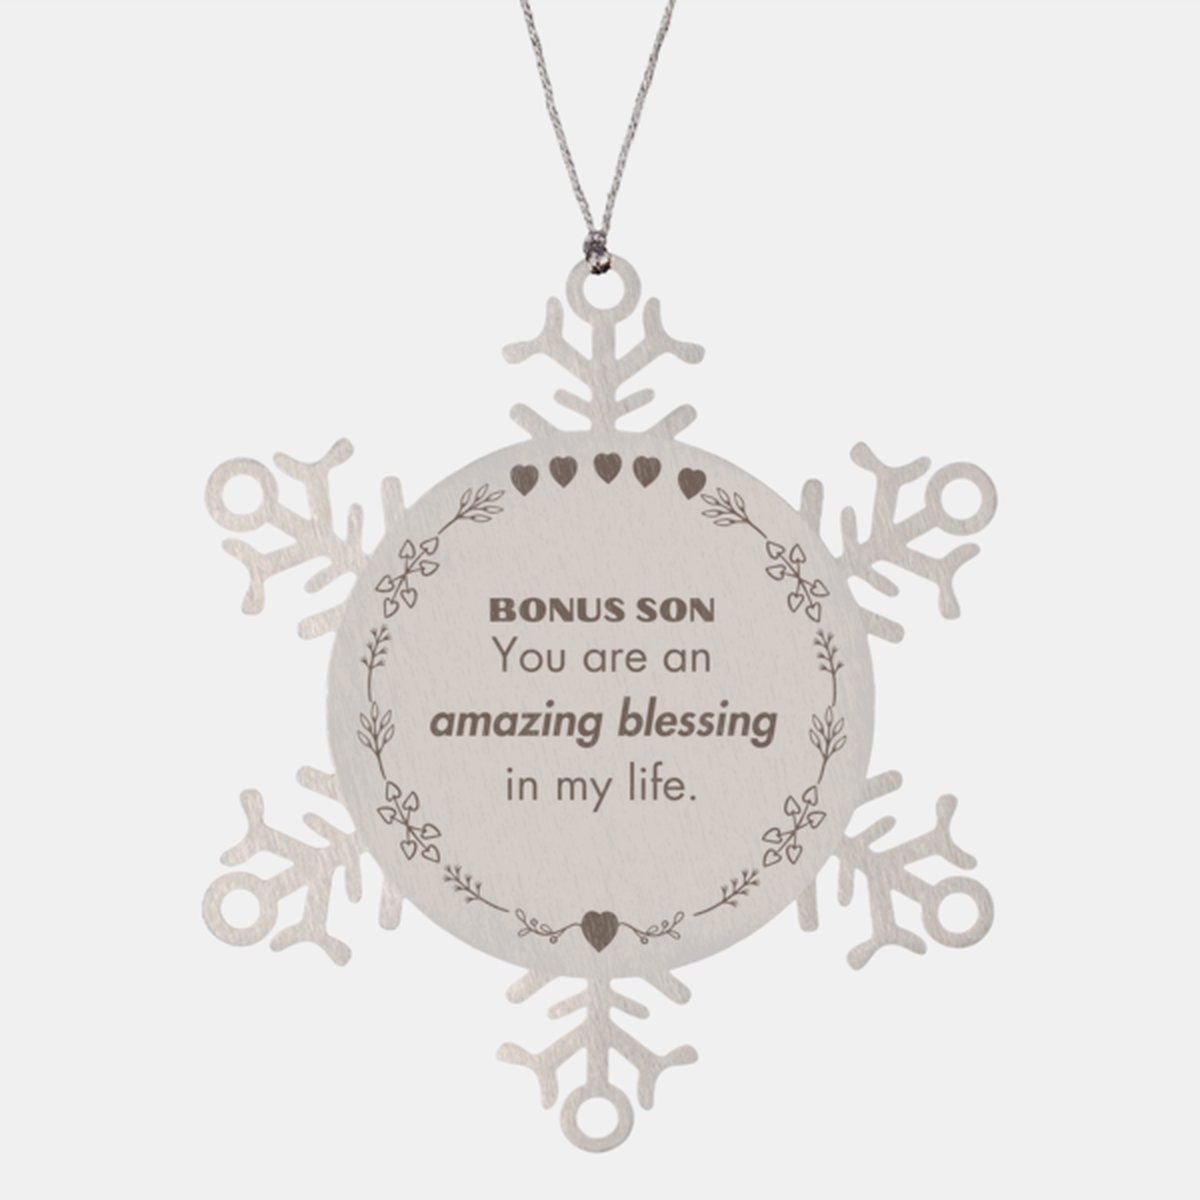 Bonus Son Snowflake Ornament, You are an amazing blessing in my life, Thank You Gifts For Bonus Son, Inspirational Birthday Christmas Unique Gifts For Bonus Son